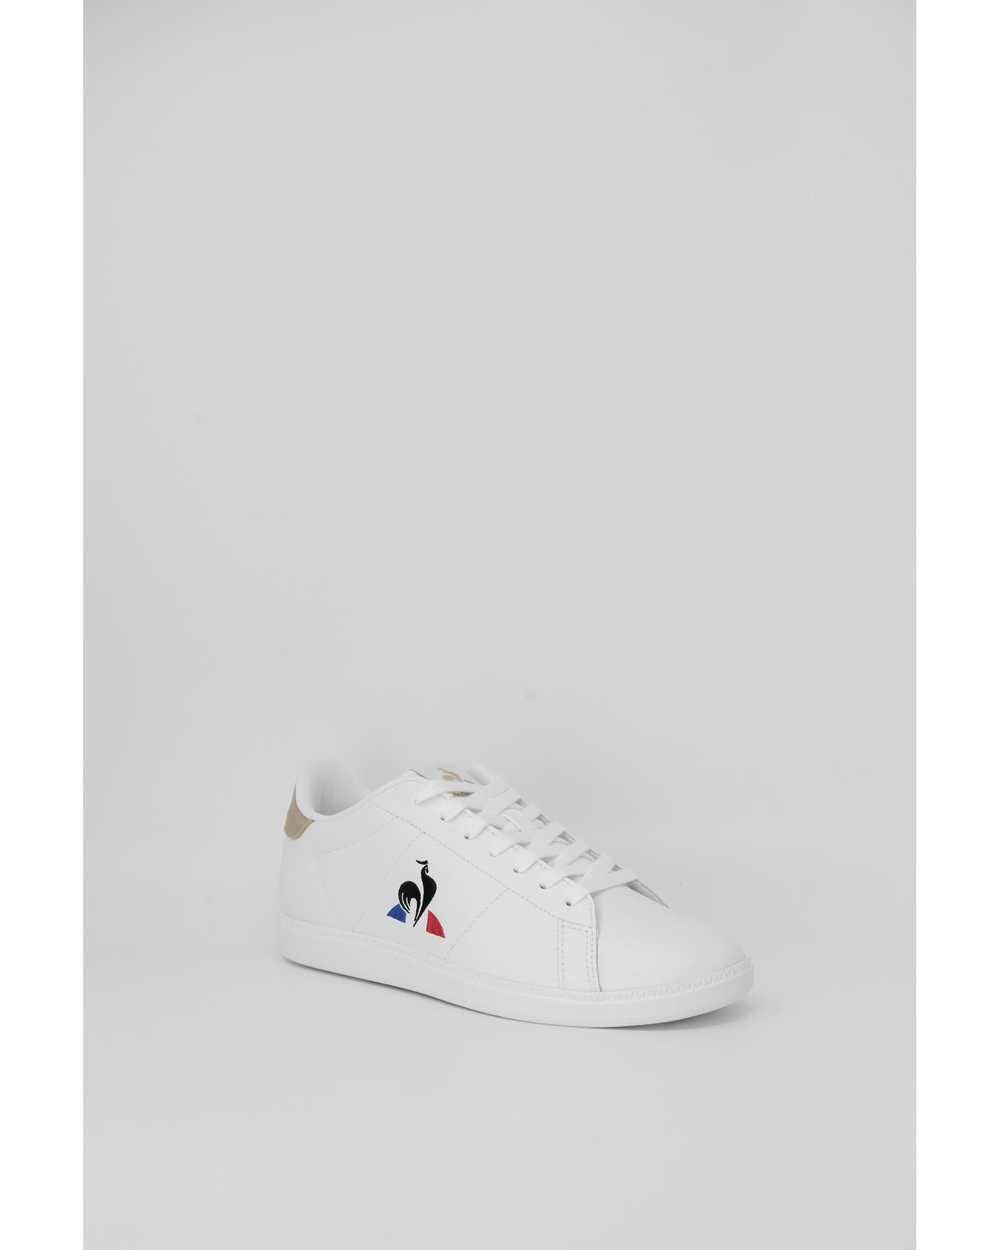 Le Coq Sportif Leather Lace-up Sneakers with Rubb… - image 2